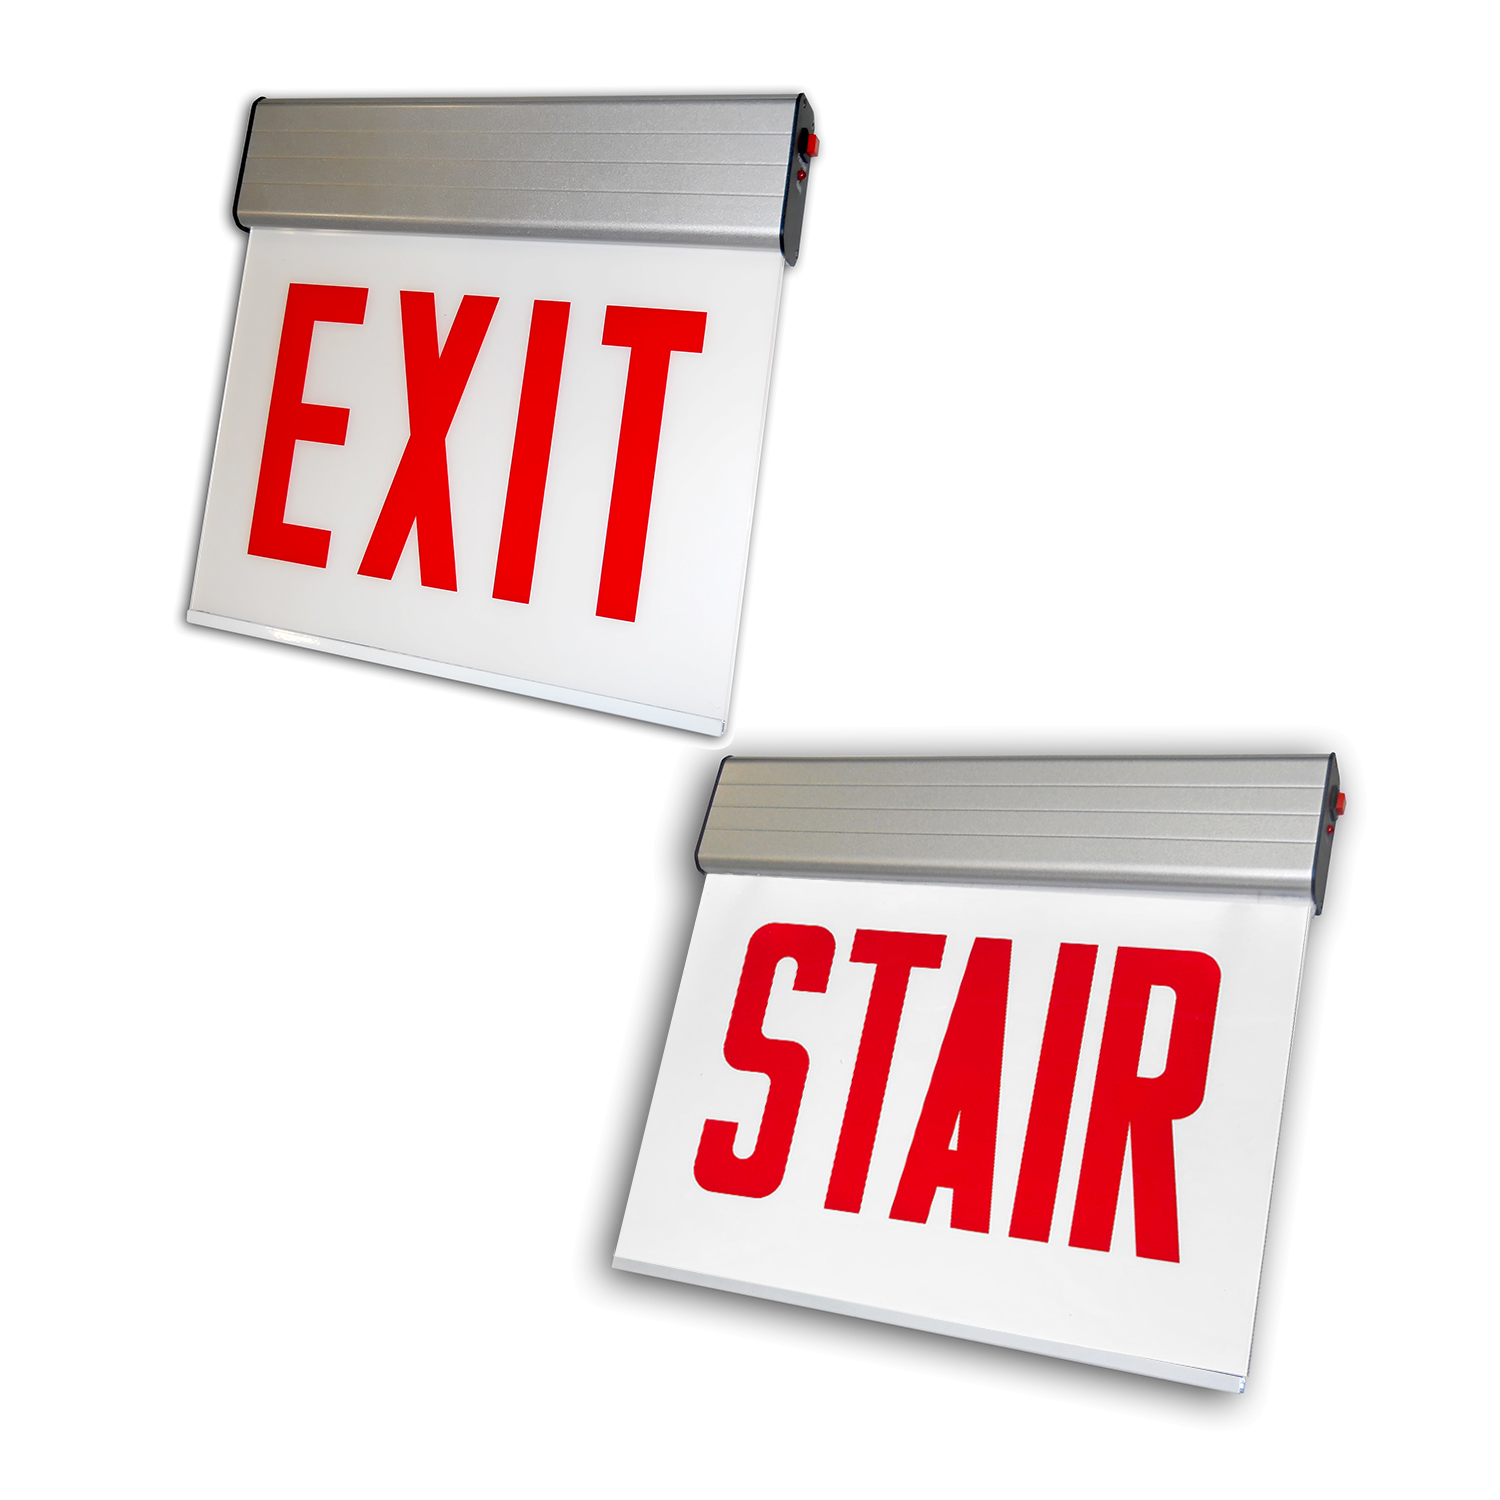 CHICAGO APPROVED EDGELIT ALUMINUM EXIT/STAIR SIGN CAELXTE